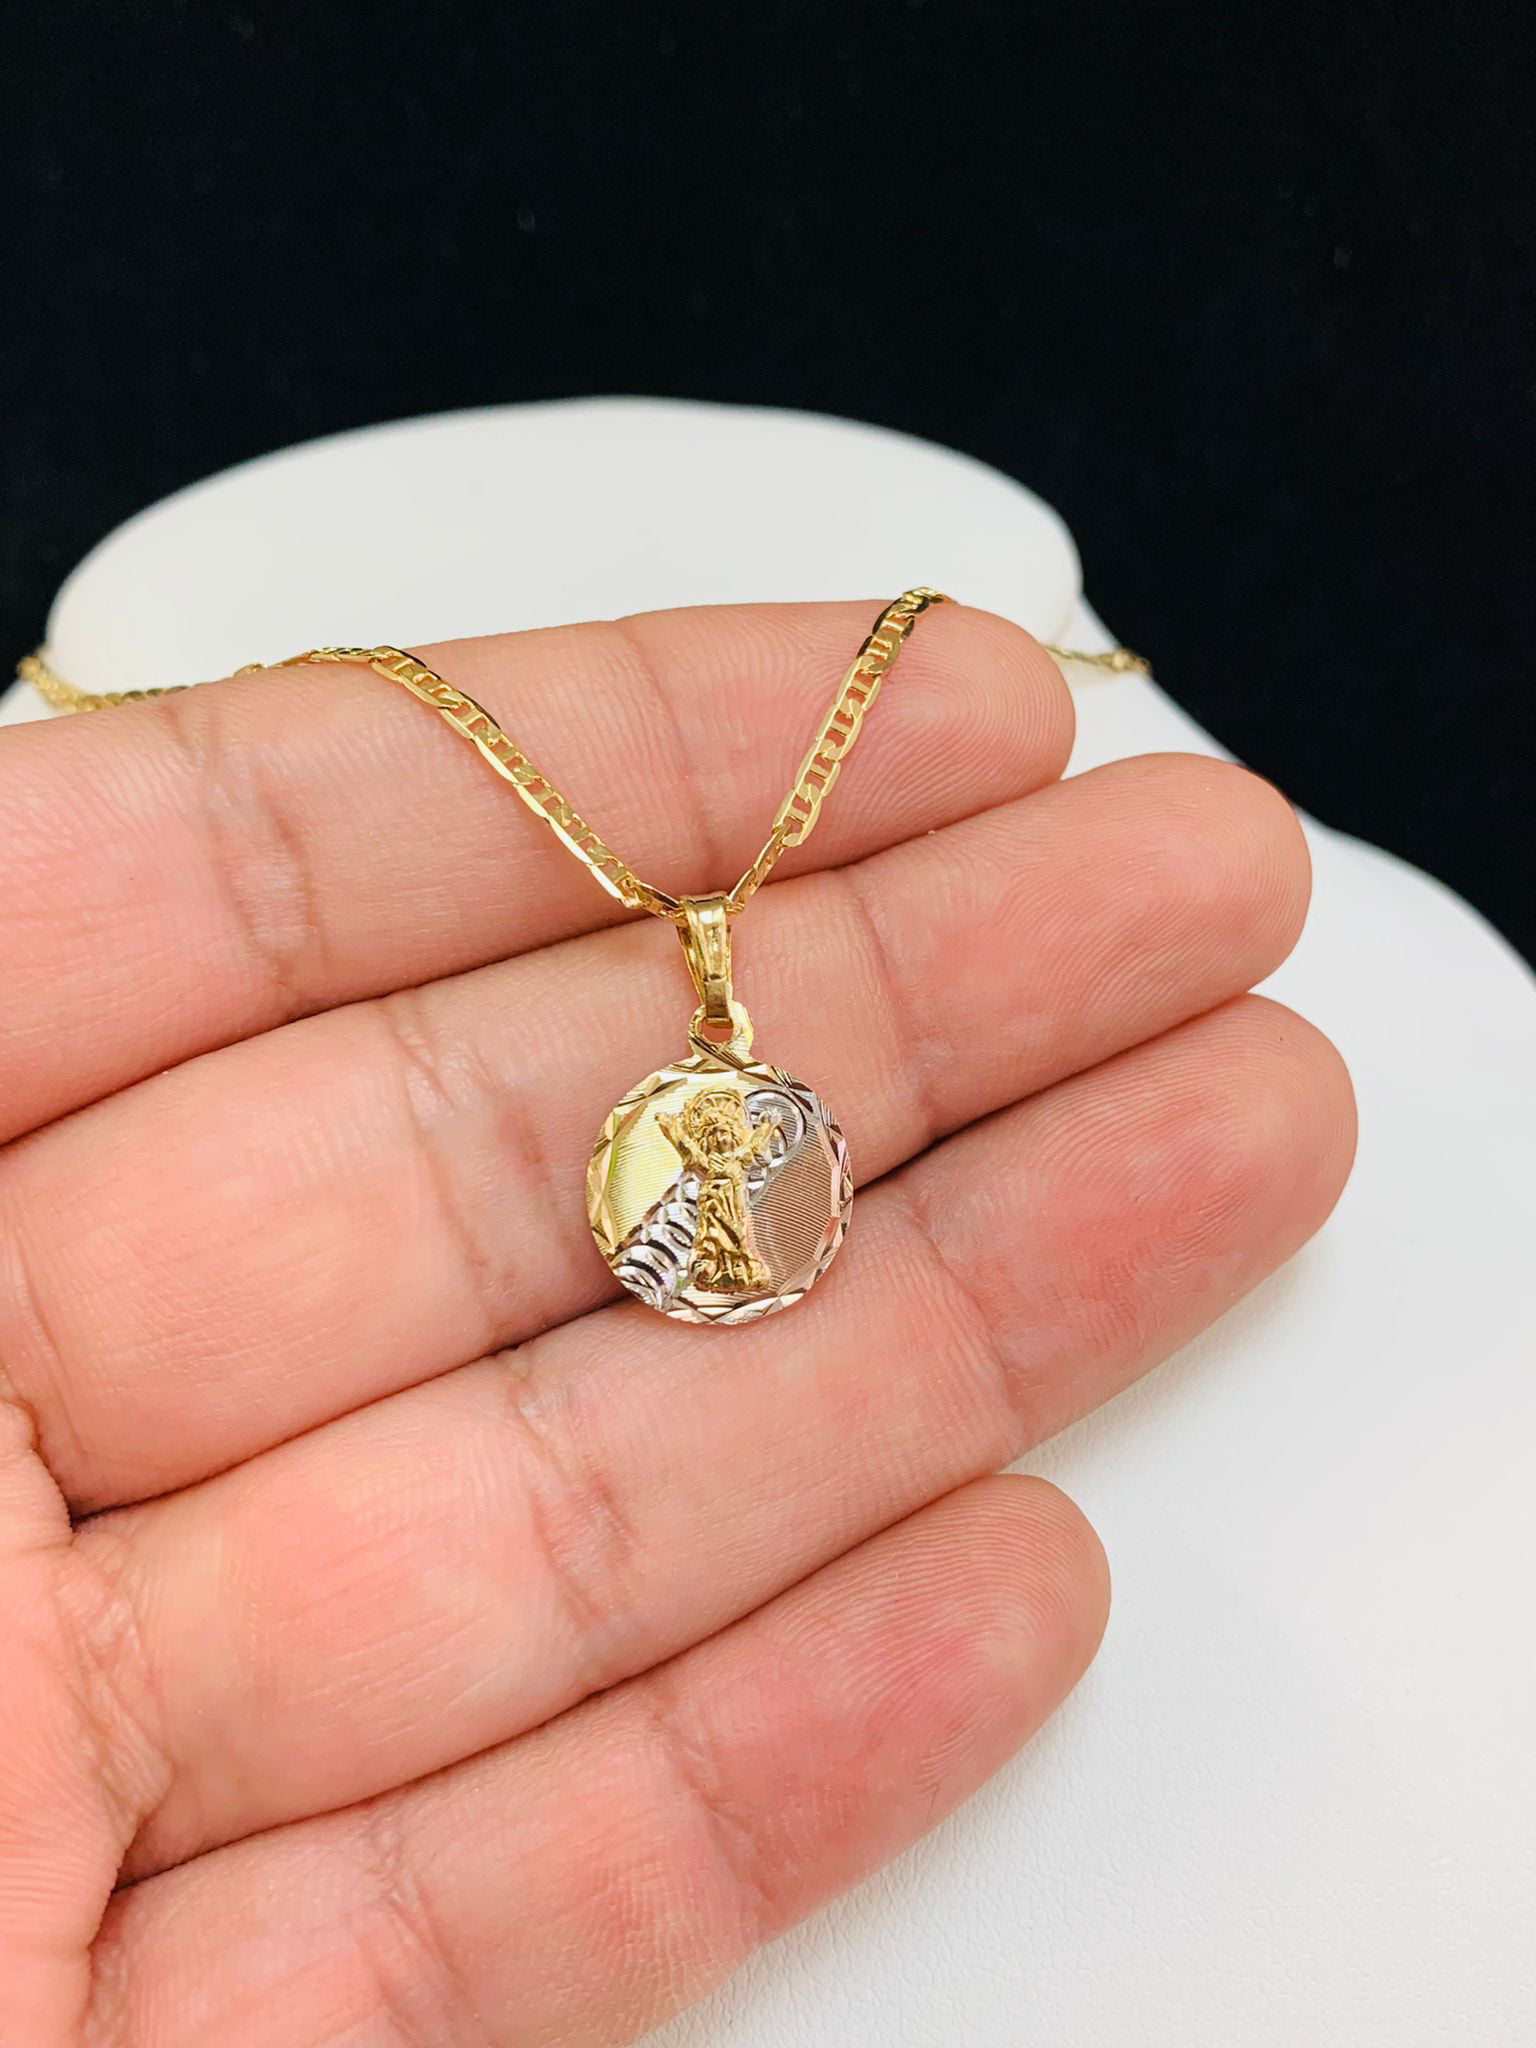 14K Solid Yellow Gold Cubic Zirconia Flower Pendant Necklace 16.5 Inches for Toddler Kids Teens 